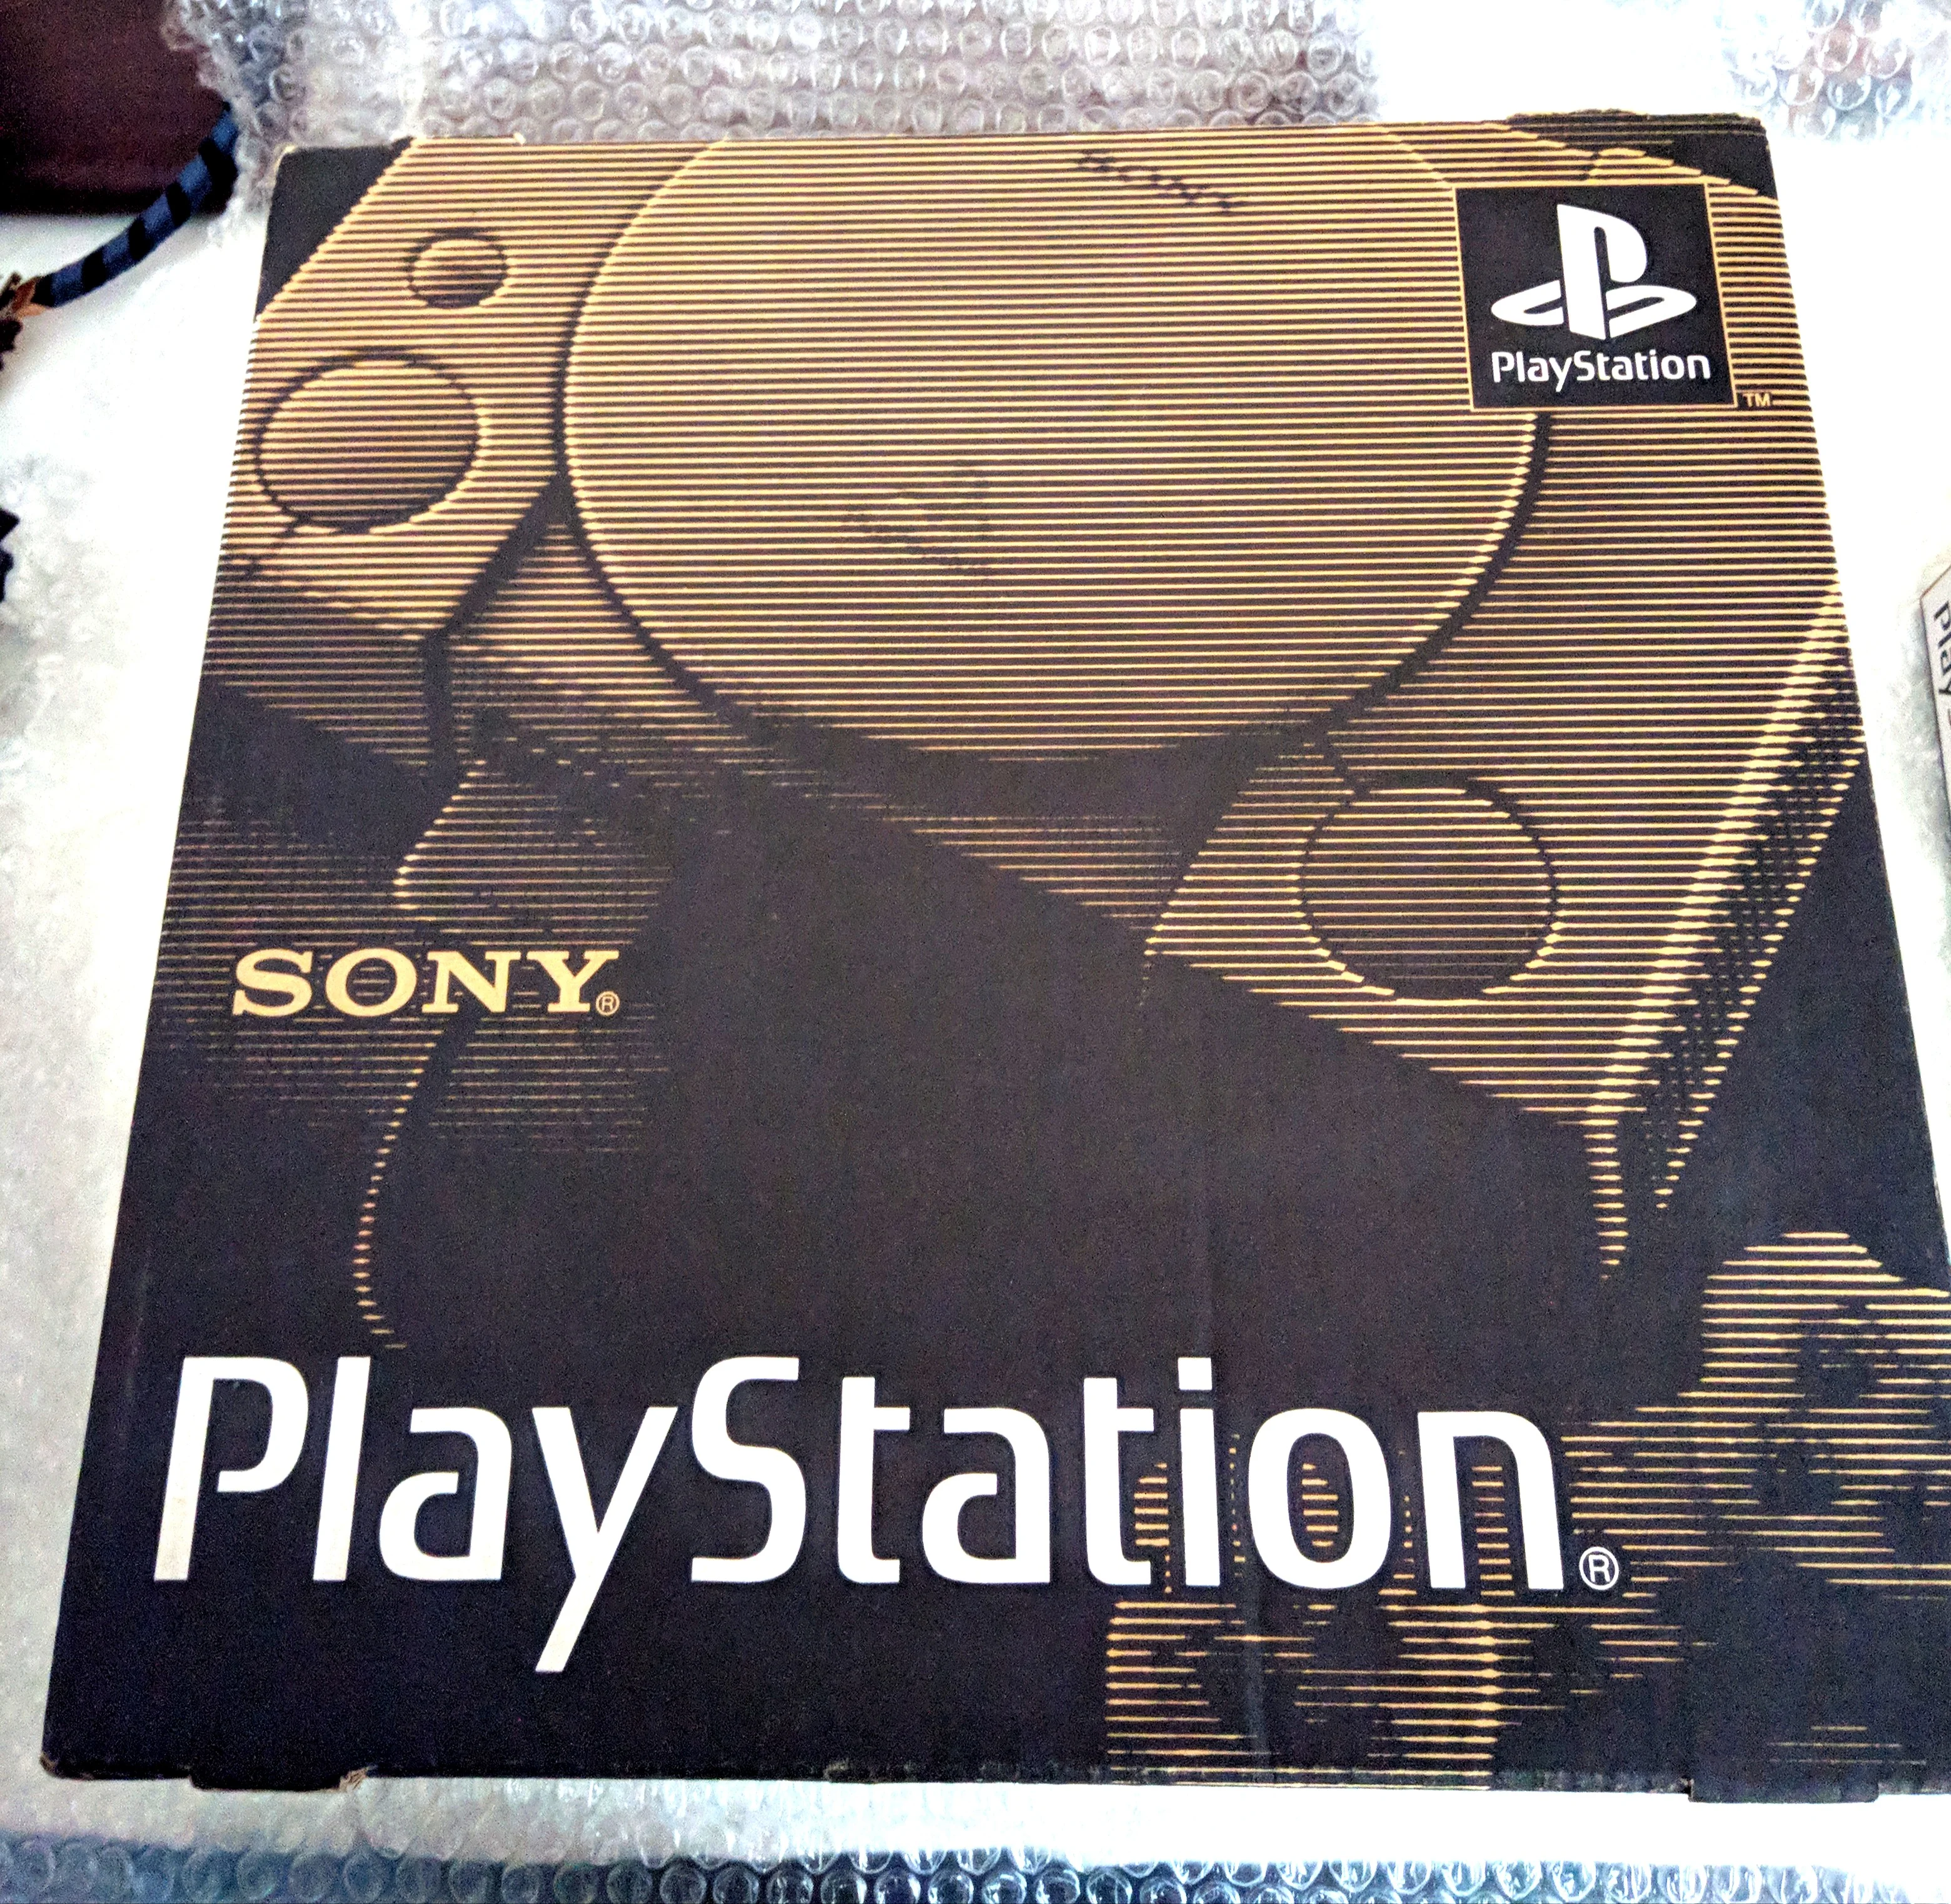  Sony Playstation SCPH 1000 Console